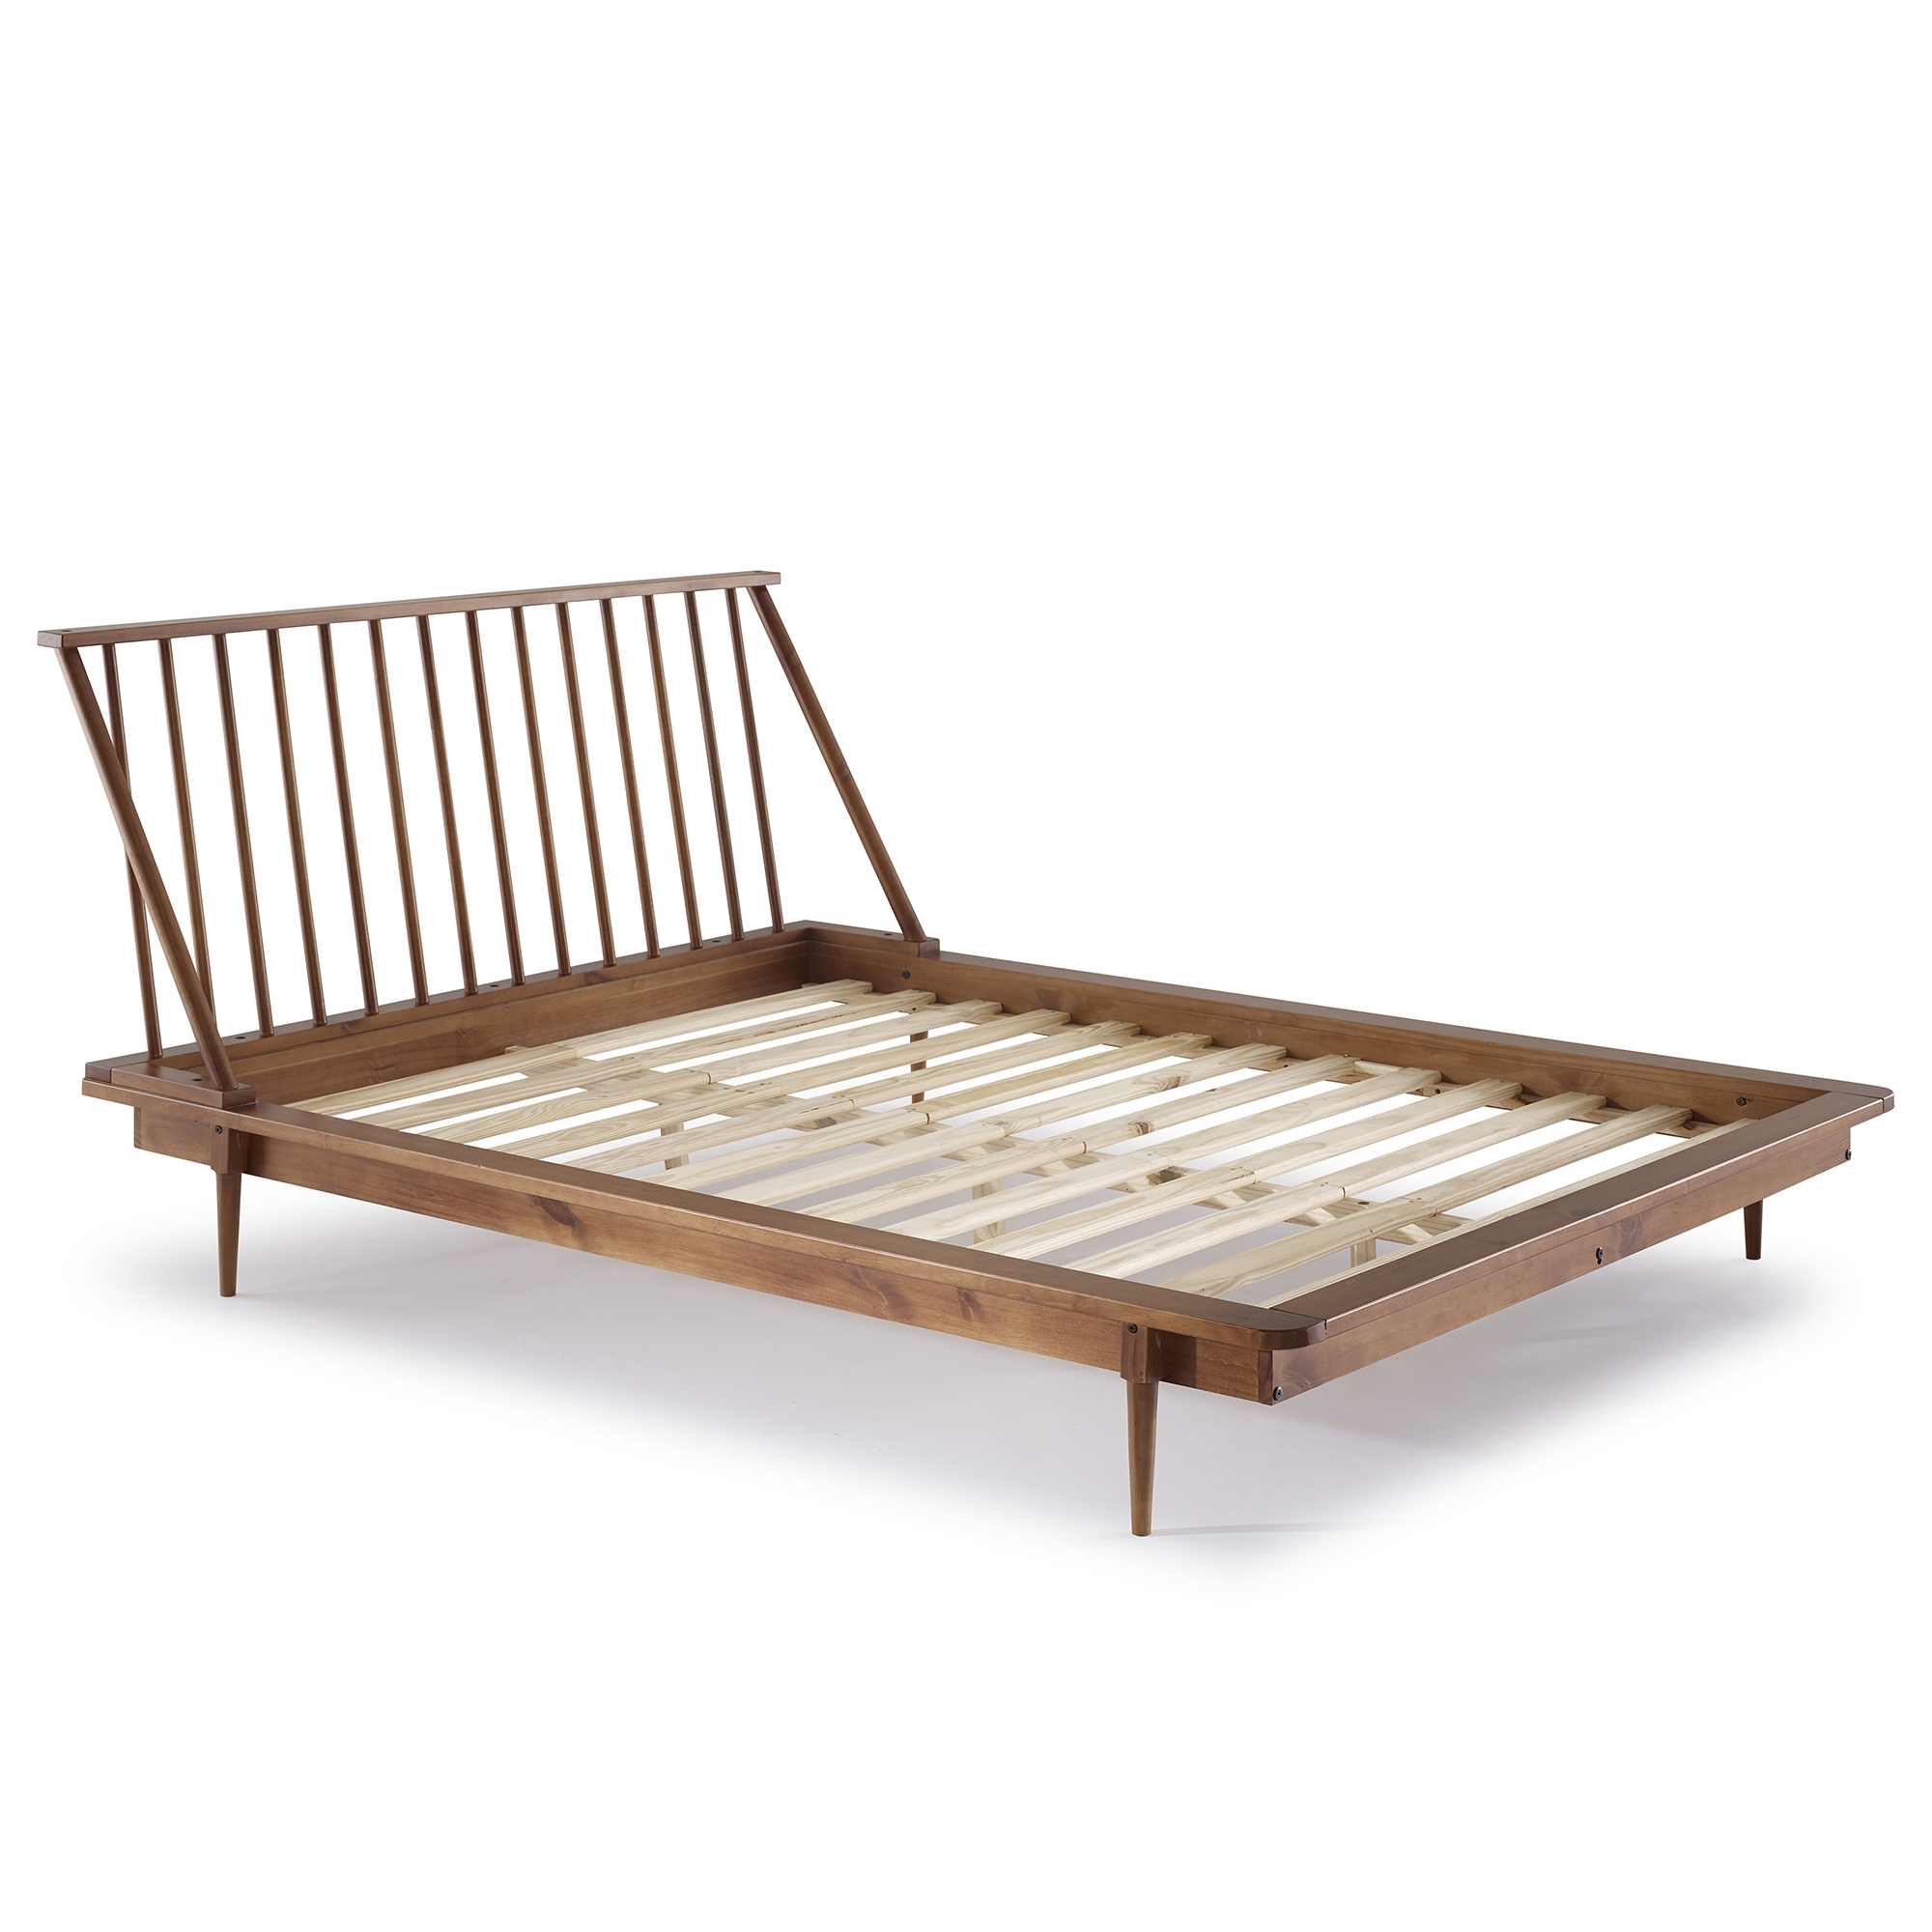 Modern Wood Queen Spindle Bed - Caramel - Image 2